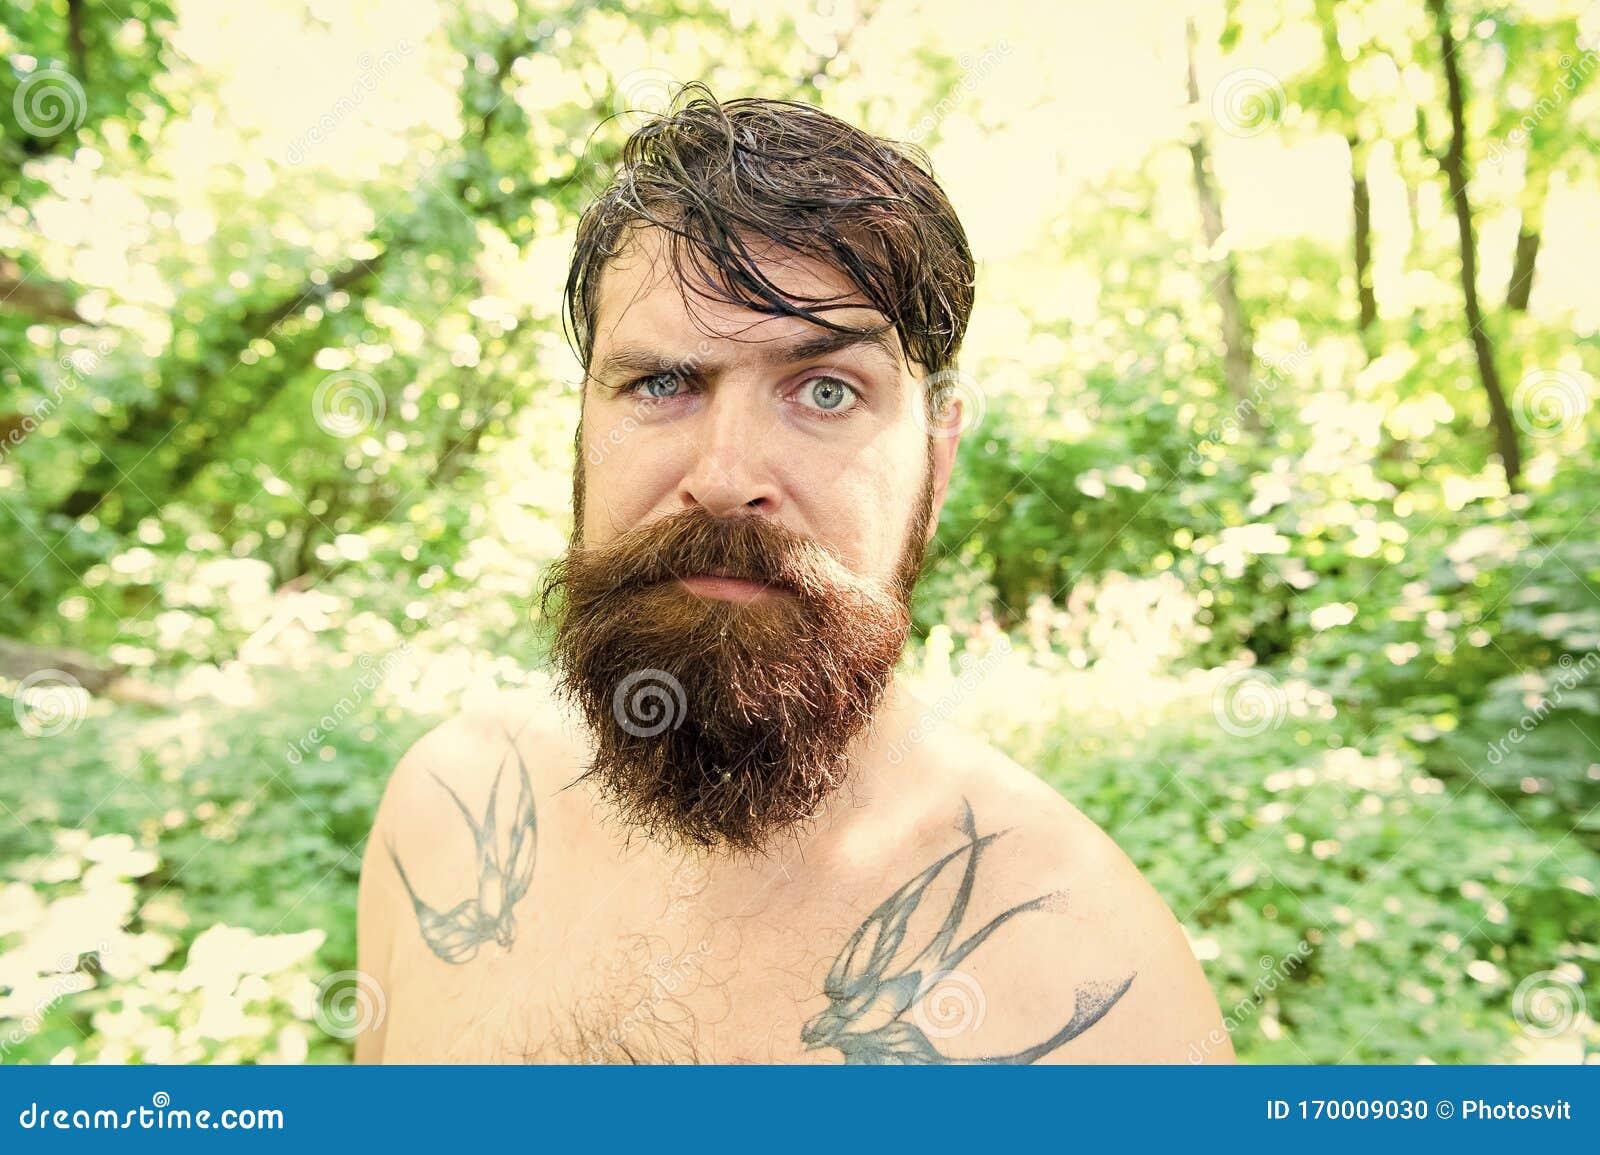 Brutal and Hairy Hipster Wearing Long Beard and Mustache in Brutal Style. Bearded Man with Brutal Look Summer Stock Photo - Image of bearded, barbering: 170009030